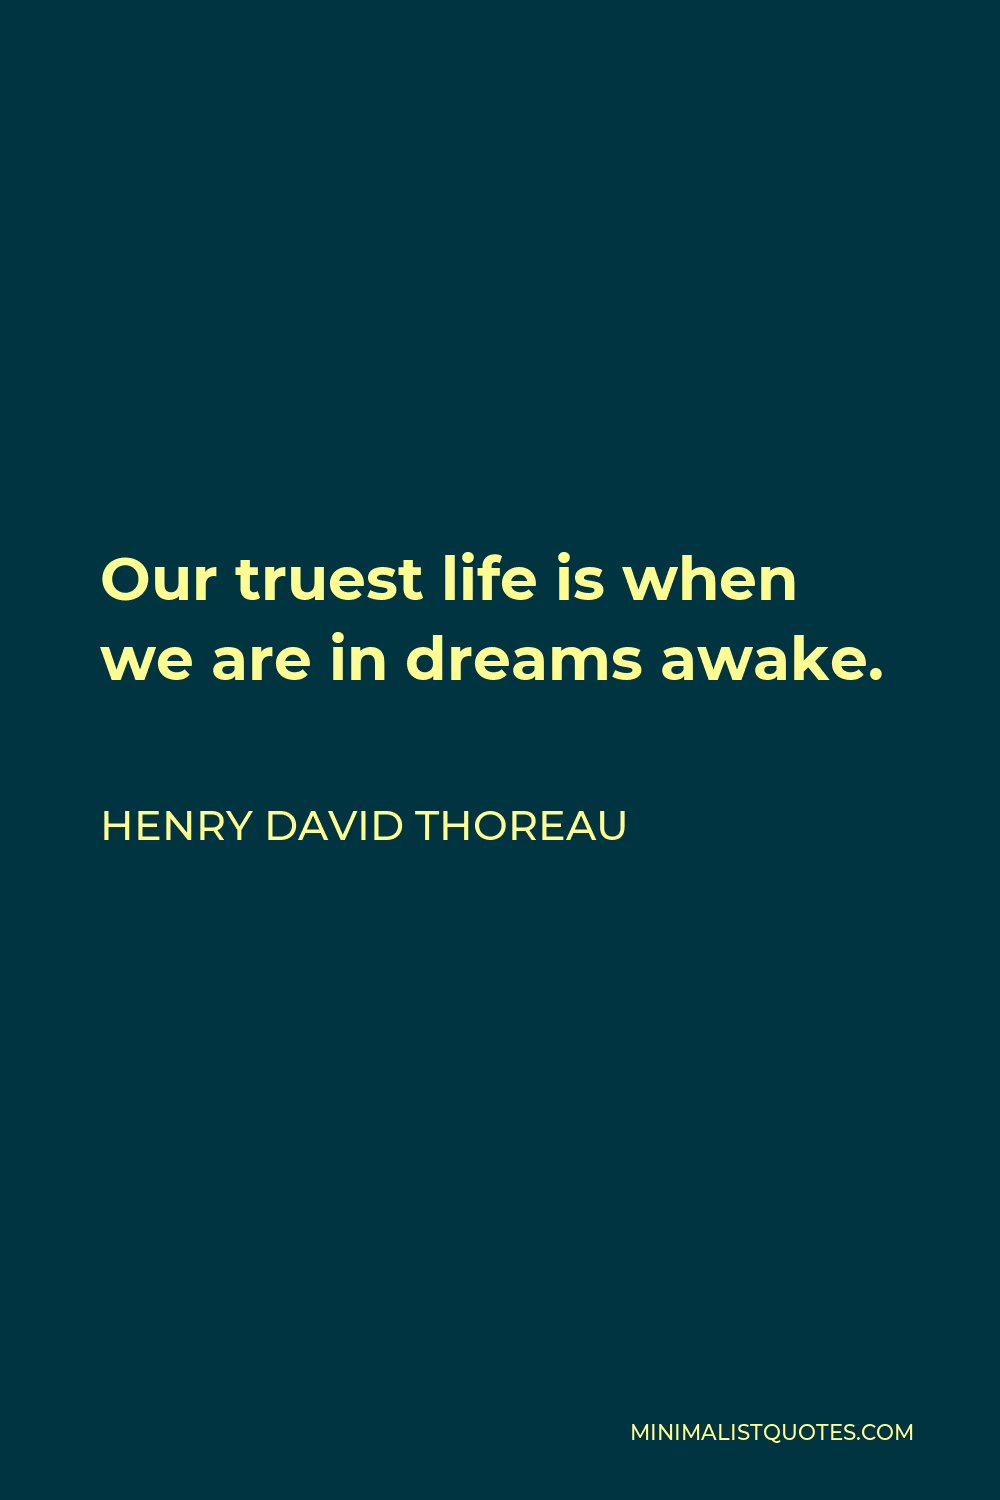 Henry David Thoreau Quote - Our truest life is when we are in dreams awake.